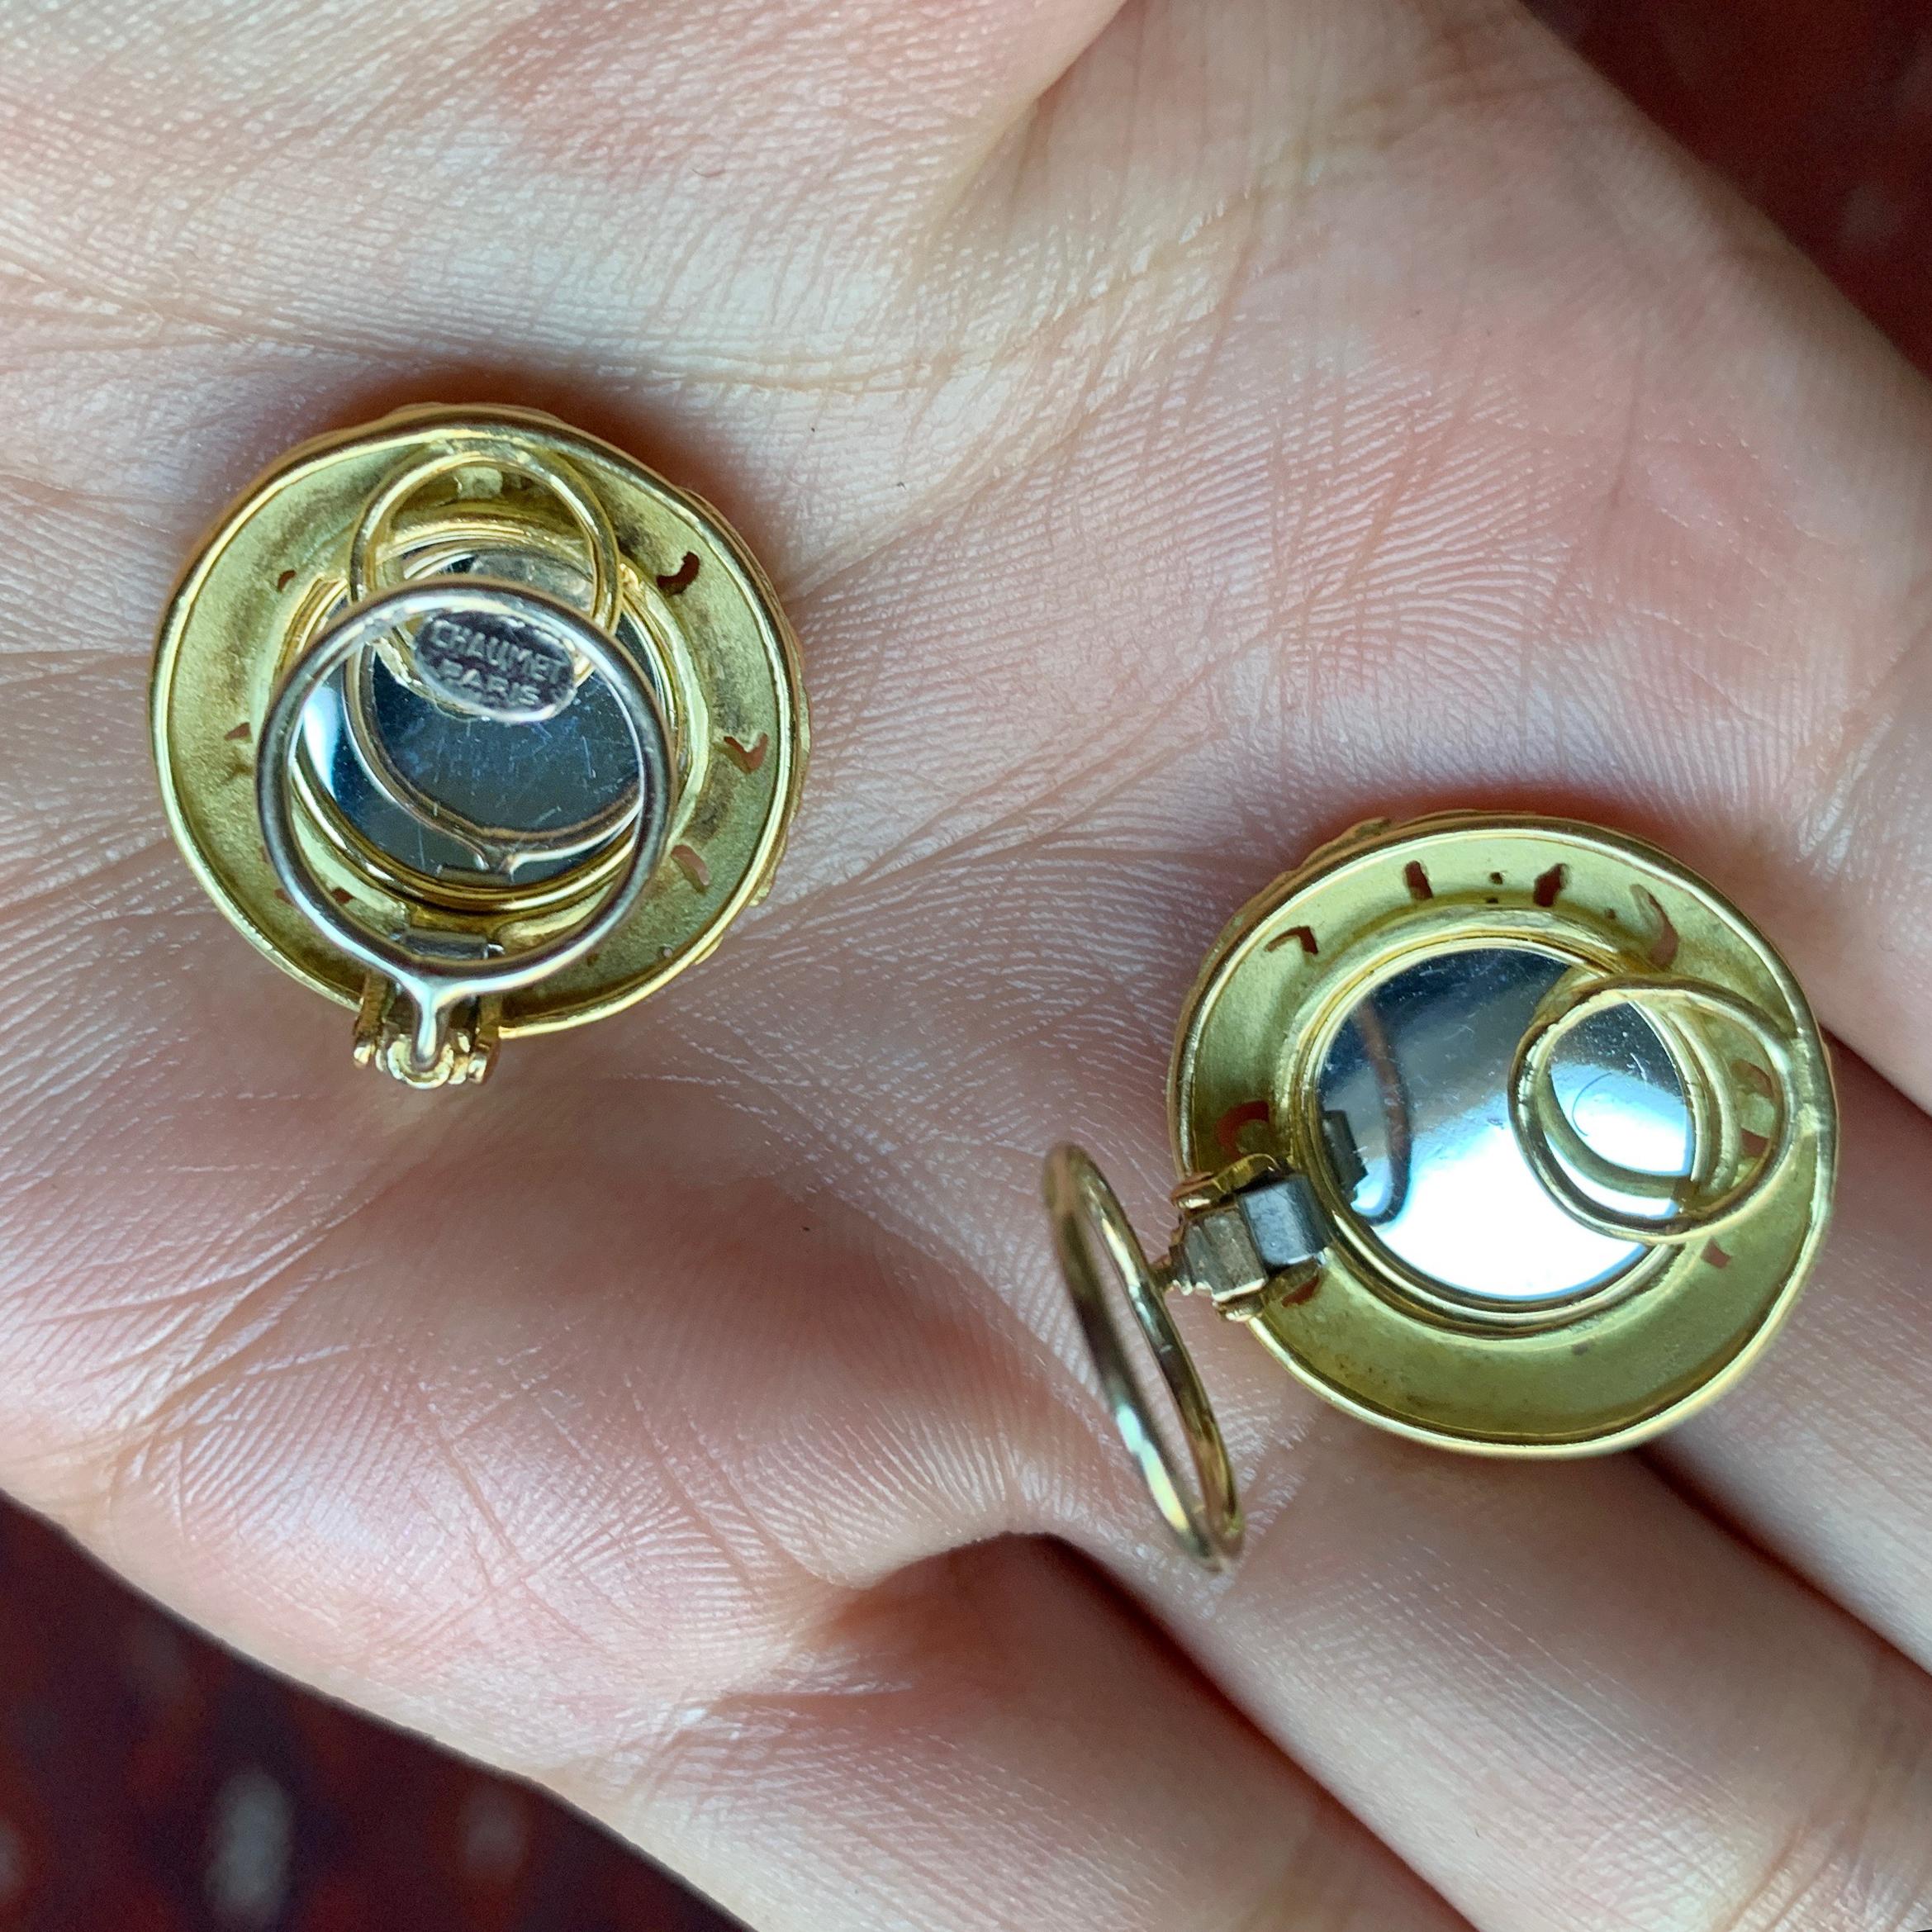 A pair of 18 karat mirror polished white gold and textured yellow gold ear clips, by Chaumet, c. 1970. 
The earrings are stamped Chaumet Paris and have French stamps.